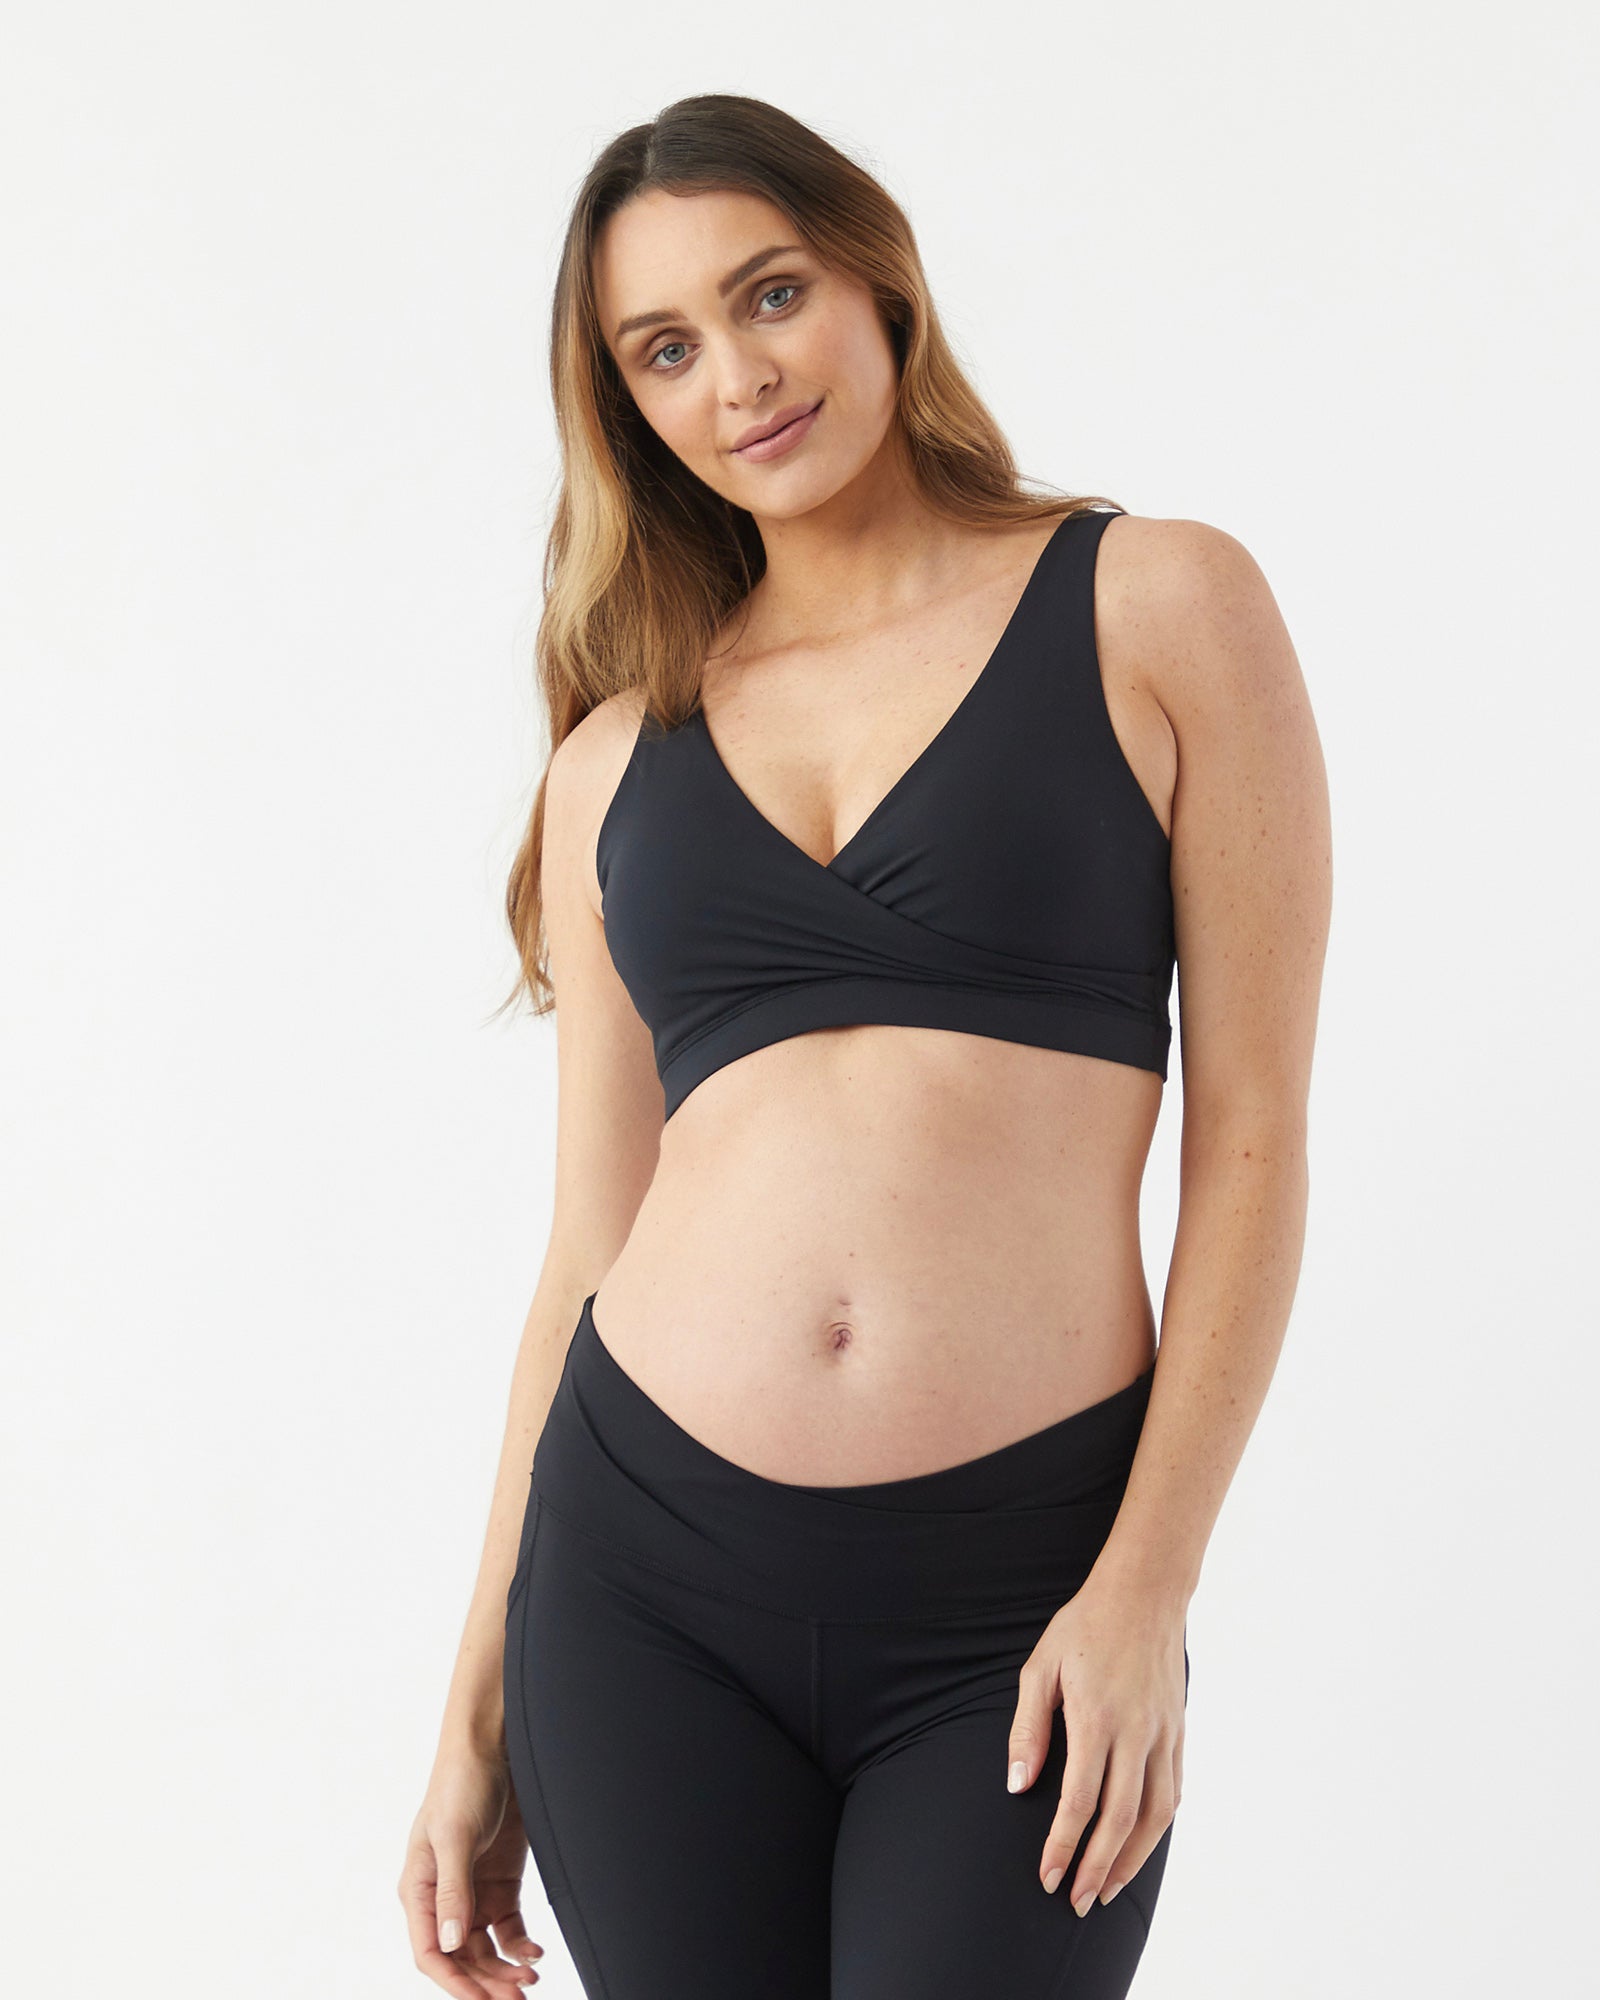 Bump & Me - The classic crossover design of our Carriwell crossover  sleeping and nursing bra allows for easy, pull-aside breastfeeding access,  perfect for those late-night feedings or quick nursing sessions while